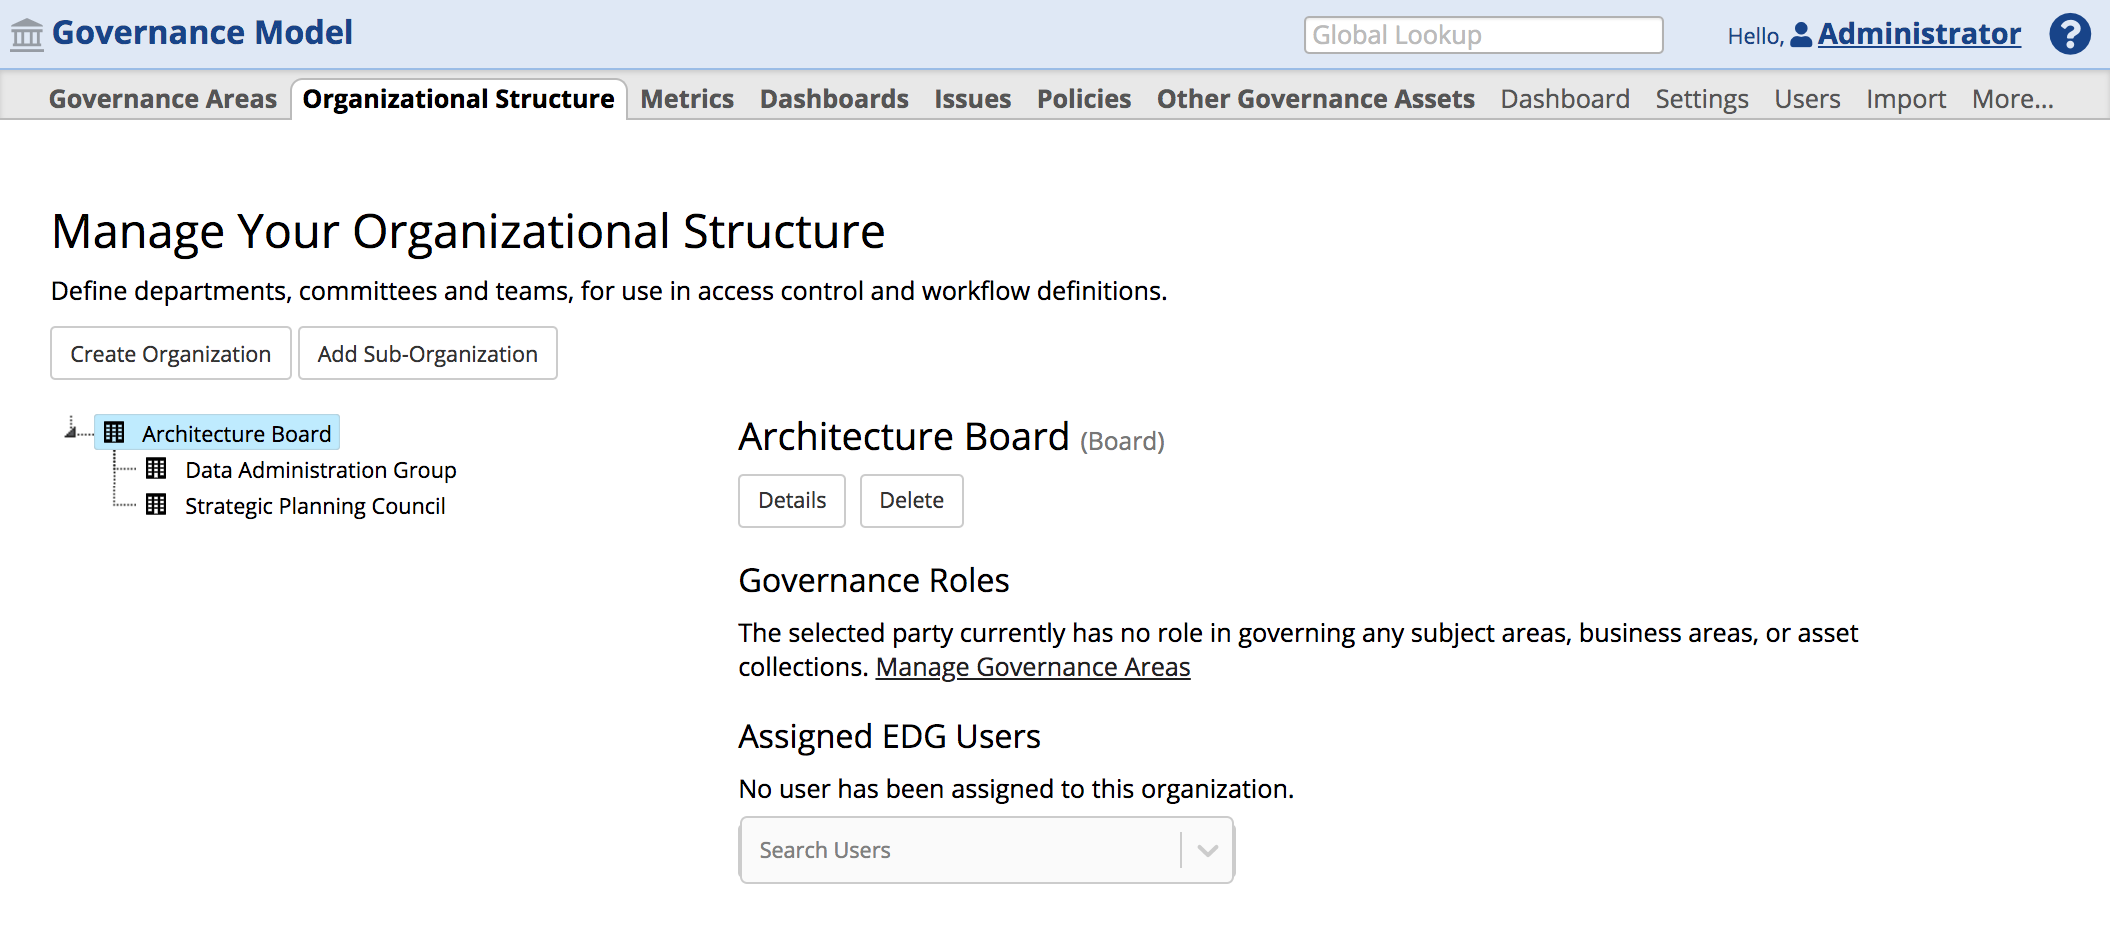 TopBraid EDG Governance Roles and Associating Users